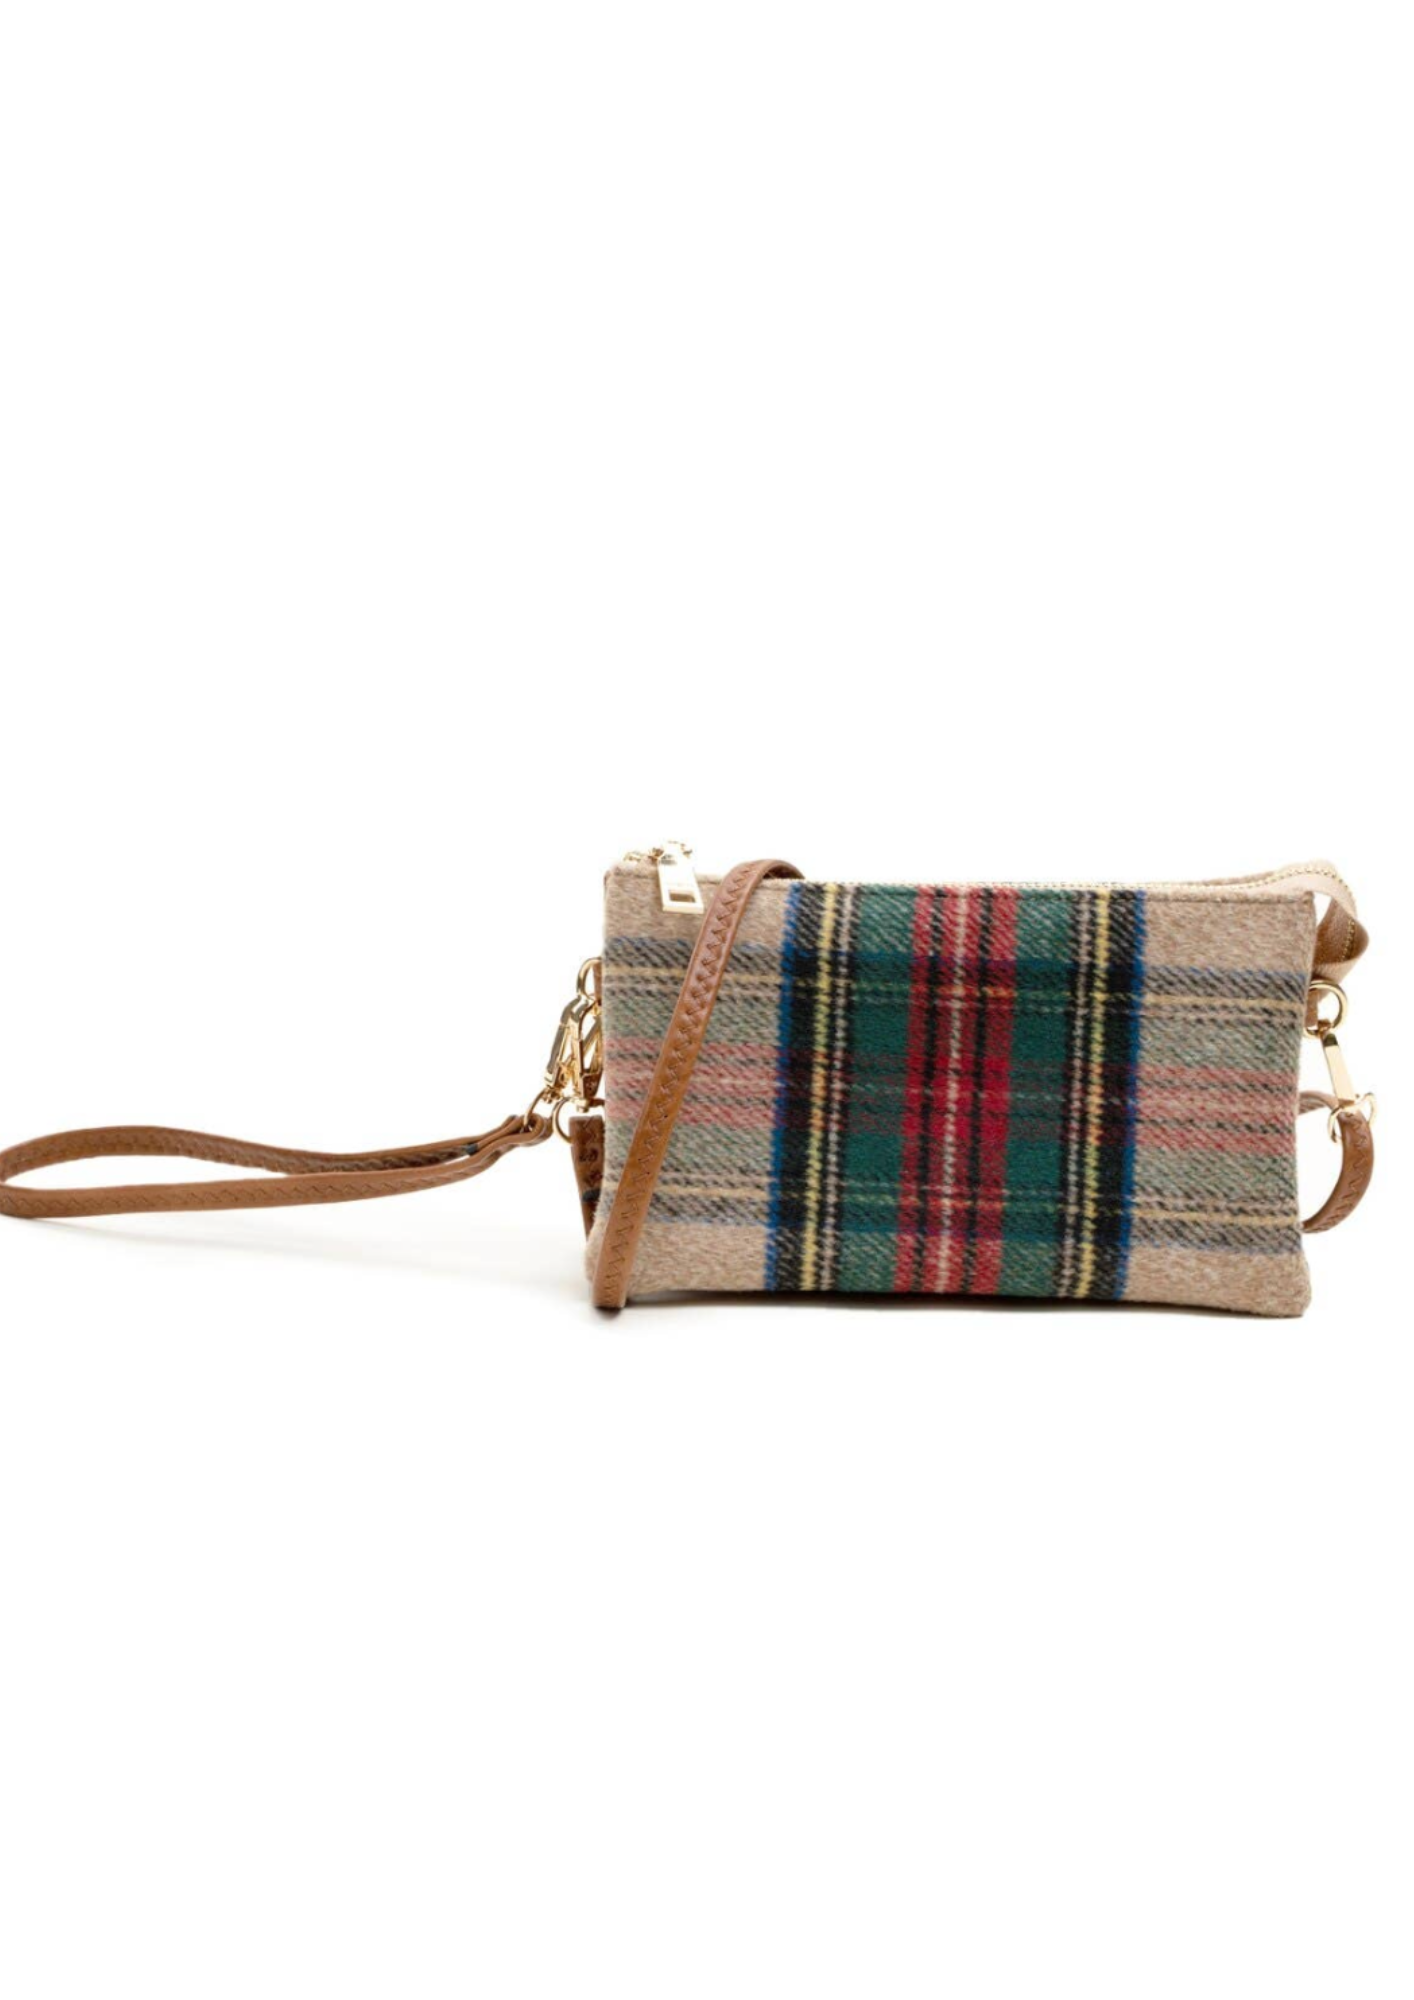 Plaid crossbody purse with tan base and blue, red, green, yellow and black plaid. 9 x 1.5 x 5 inches. Crossbody has gold hardware and comes with a brown vegan leather detachable wristlet and crossbody strap. 